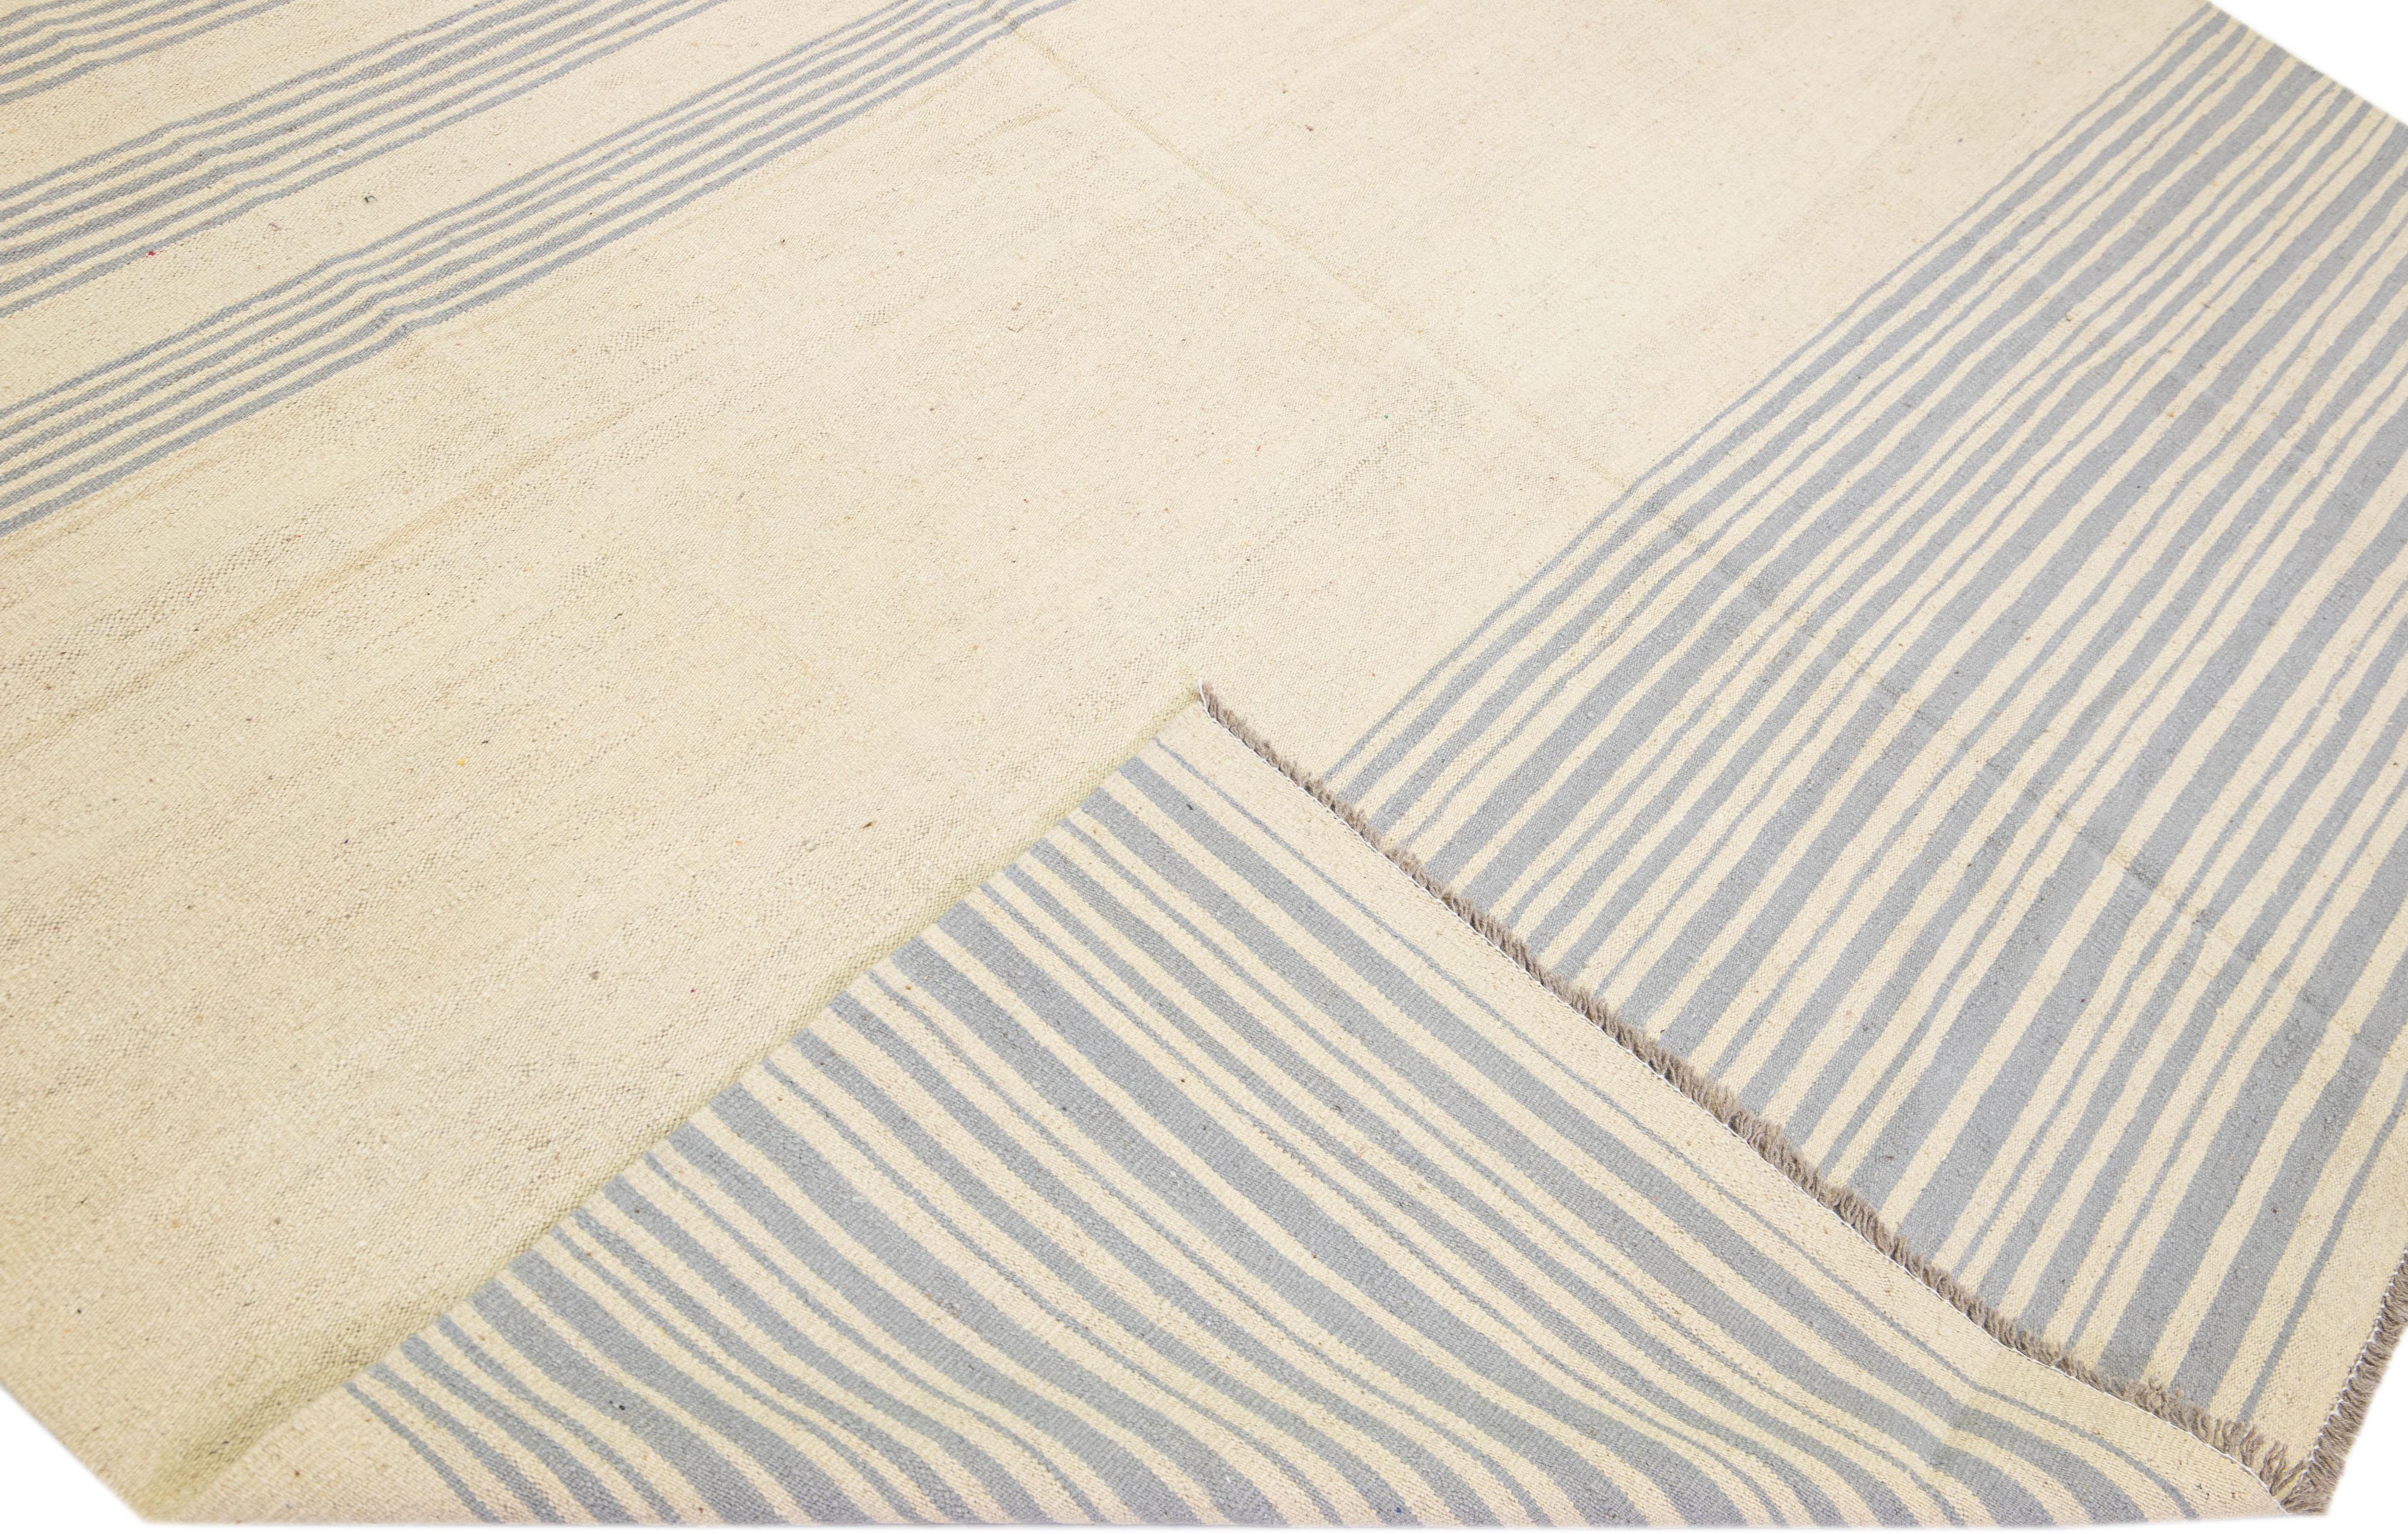 Beautiful Modern flat-weave Kilim handmade wool rug with a beige color field. This Kilim rug has gray accents in a gorgeous stripe design.

This rug measures: 9'1